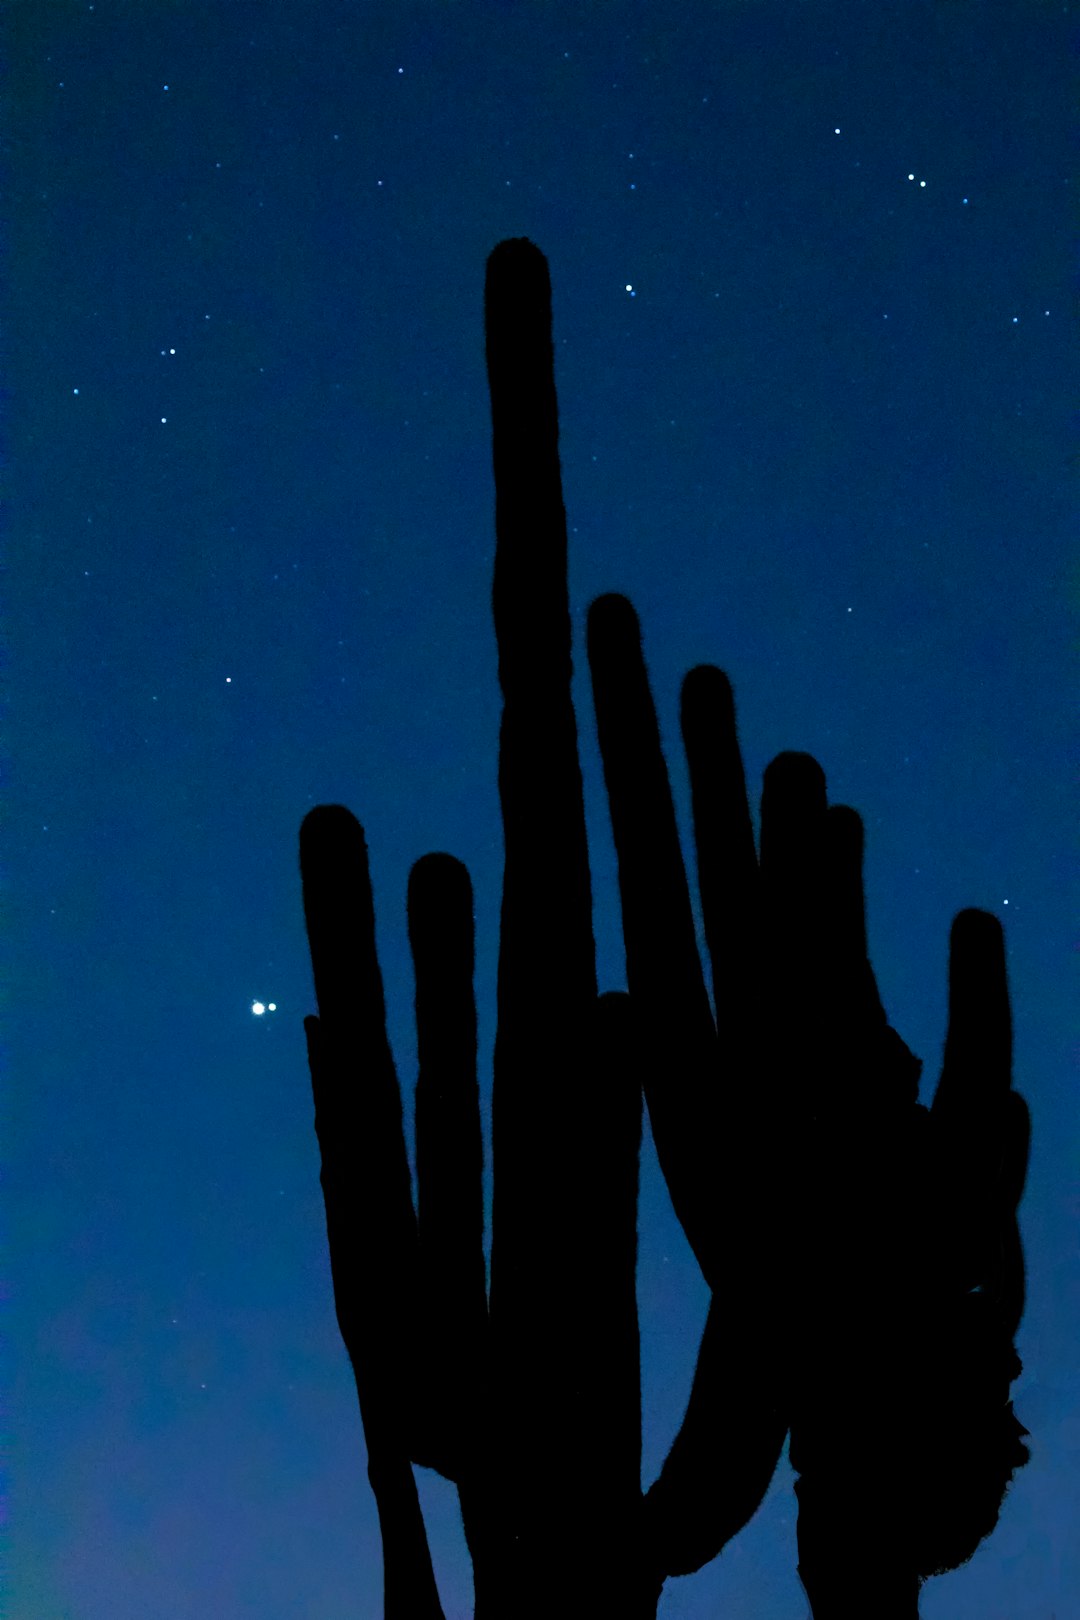 silhouette of persons hand